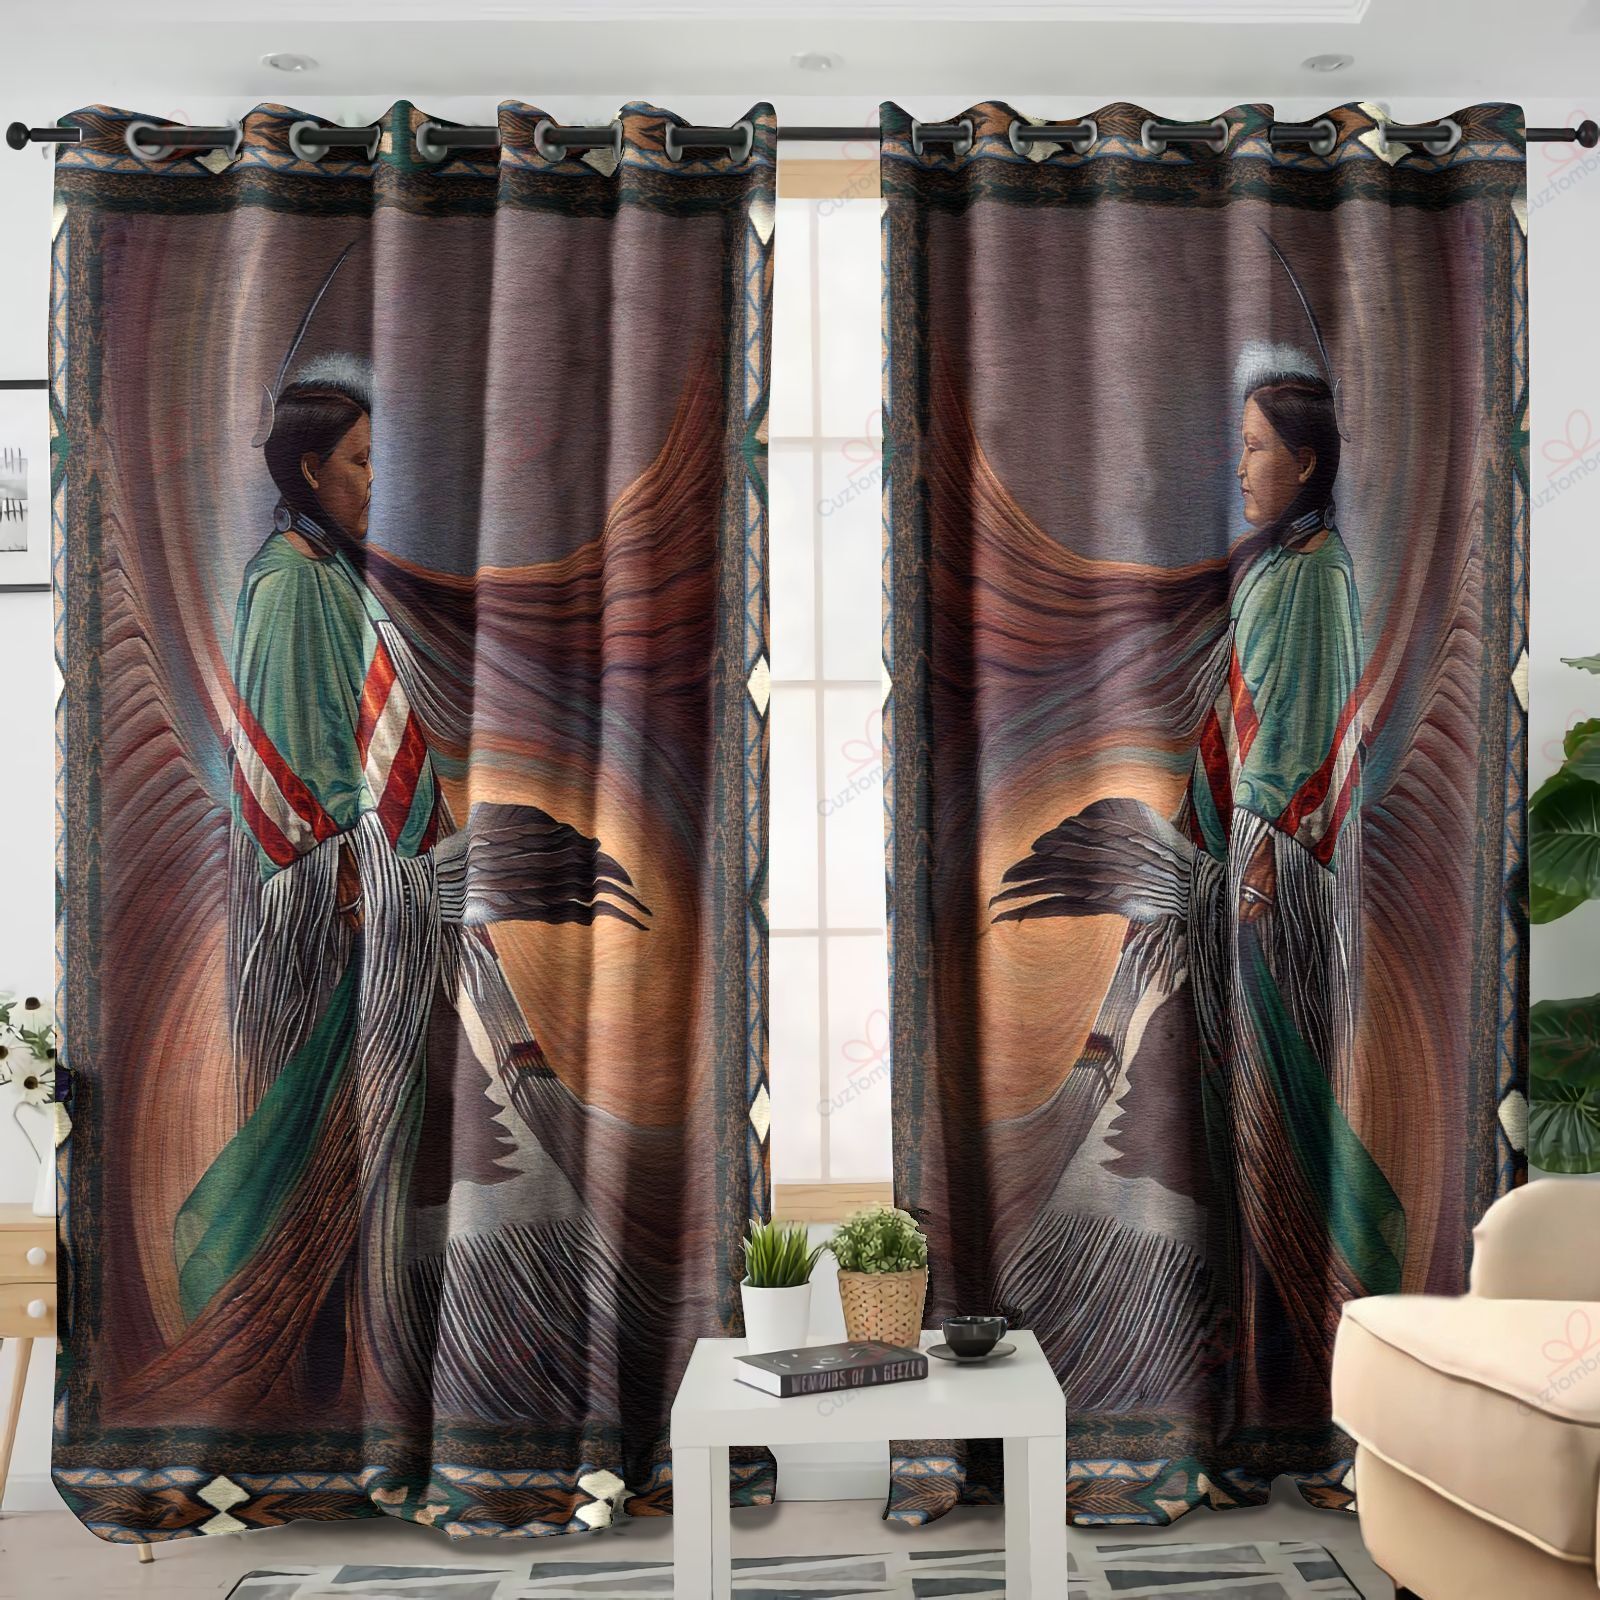 Native American Printed Window Curtains Home Decor